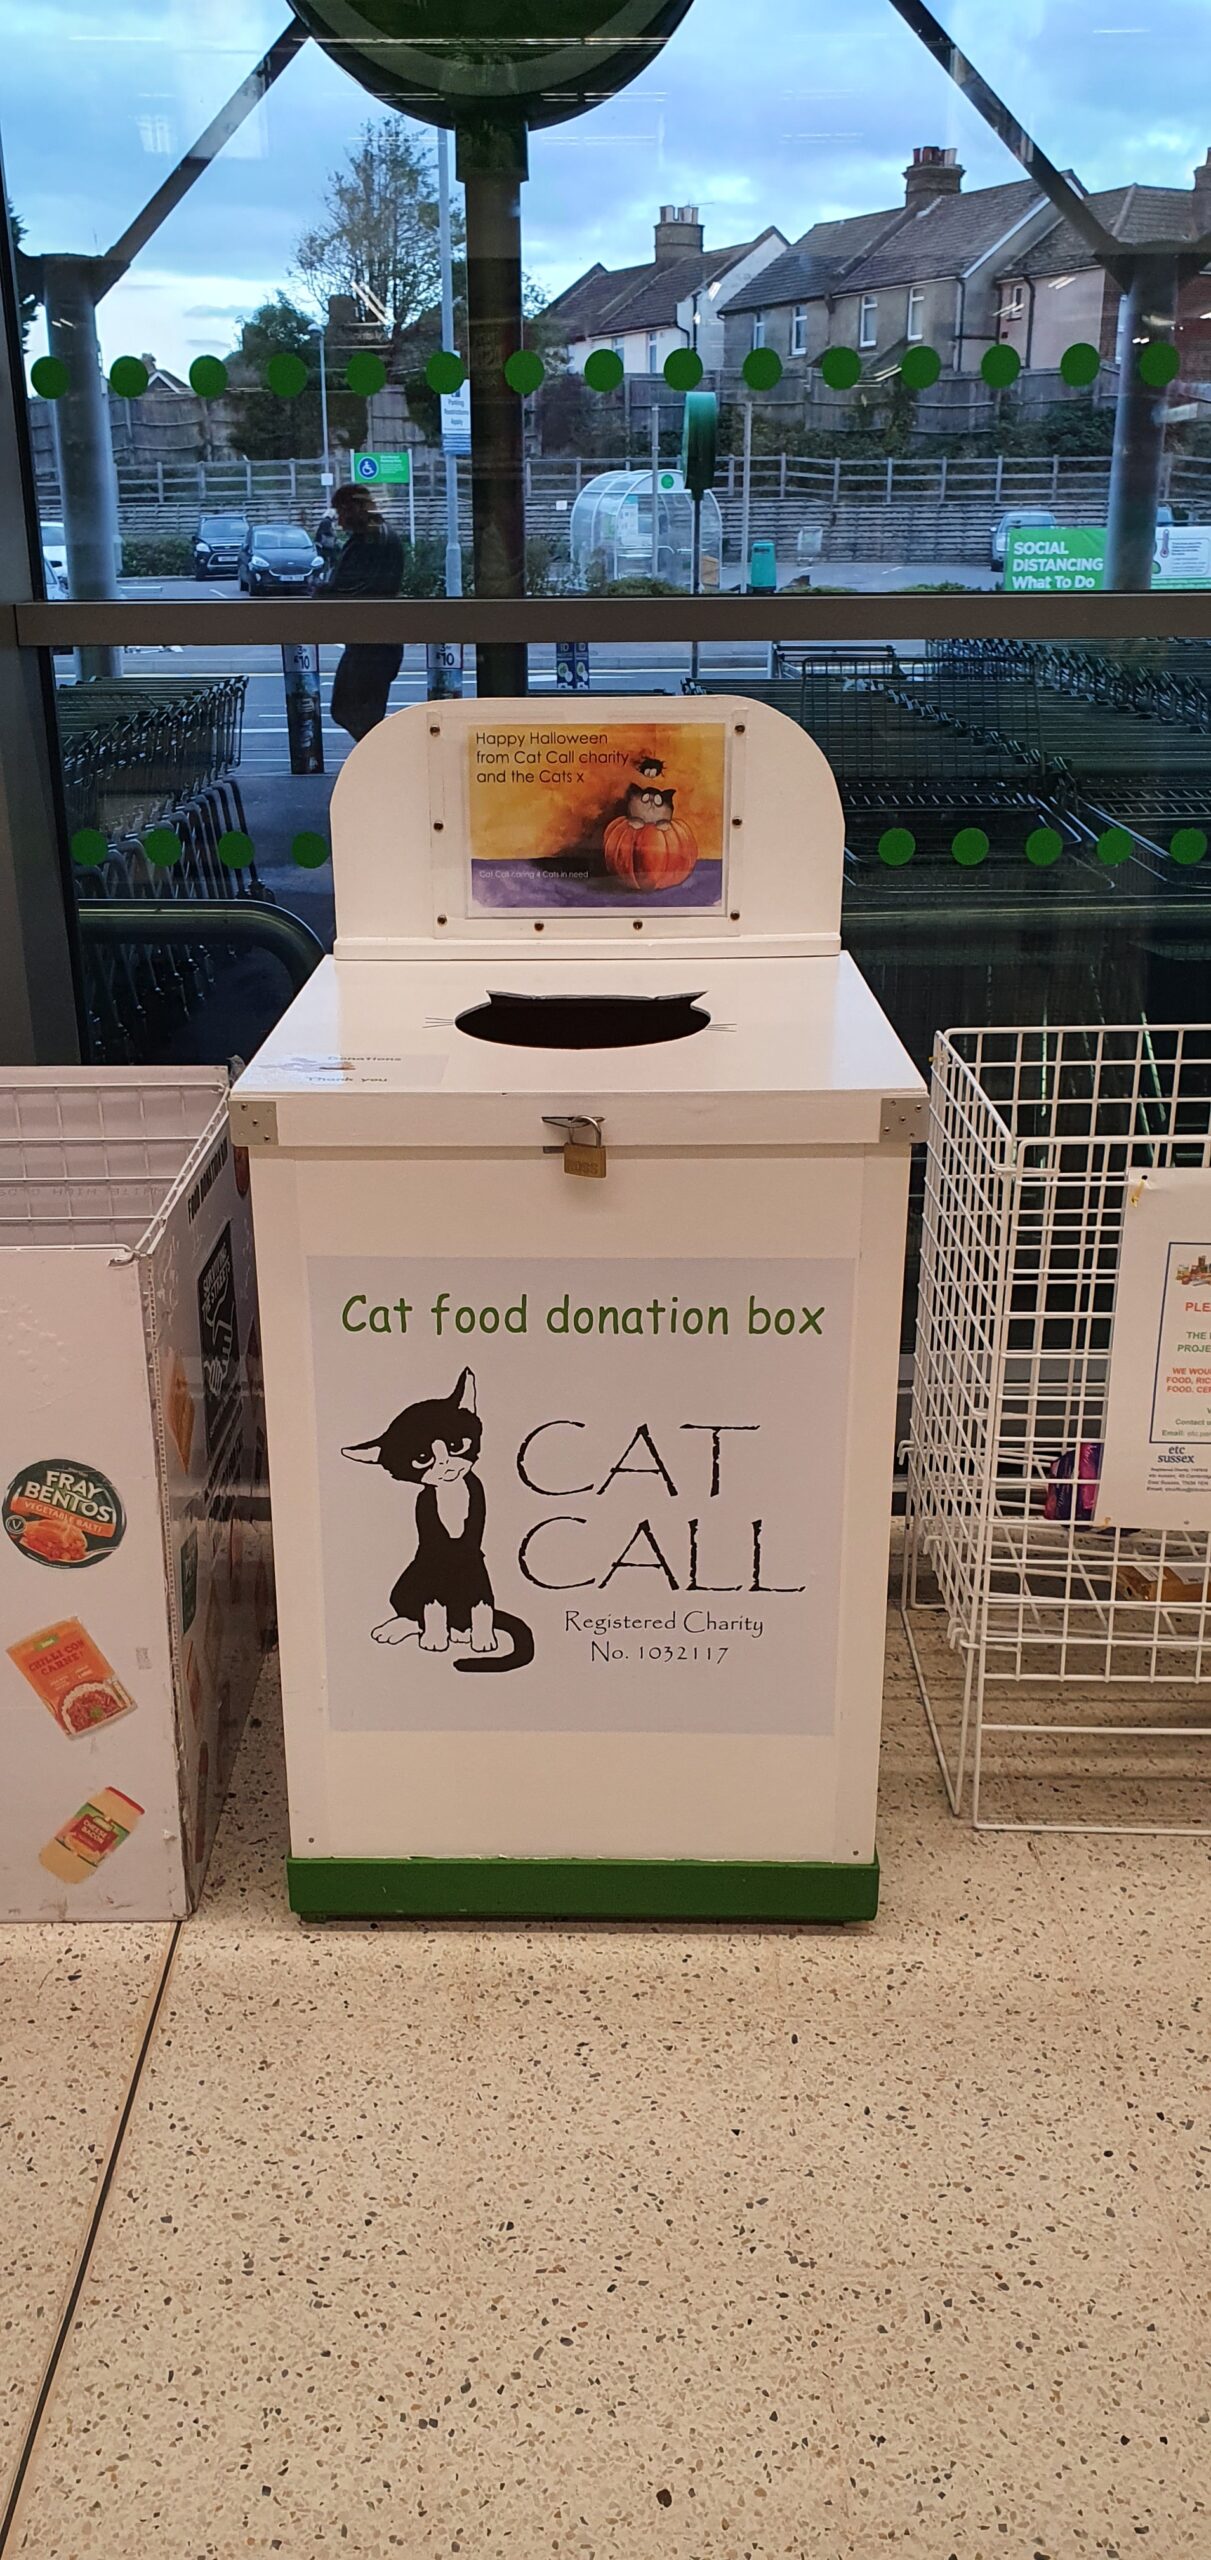 Our Cat Food Donation Box In Asda